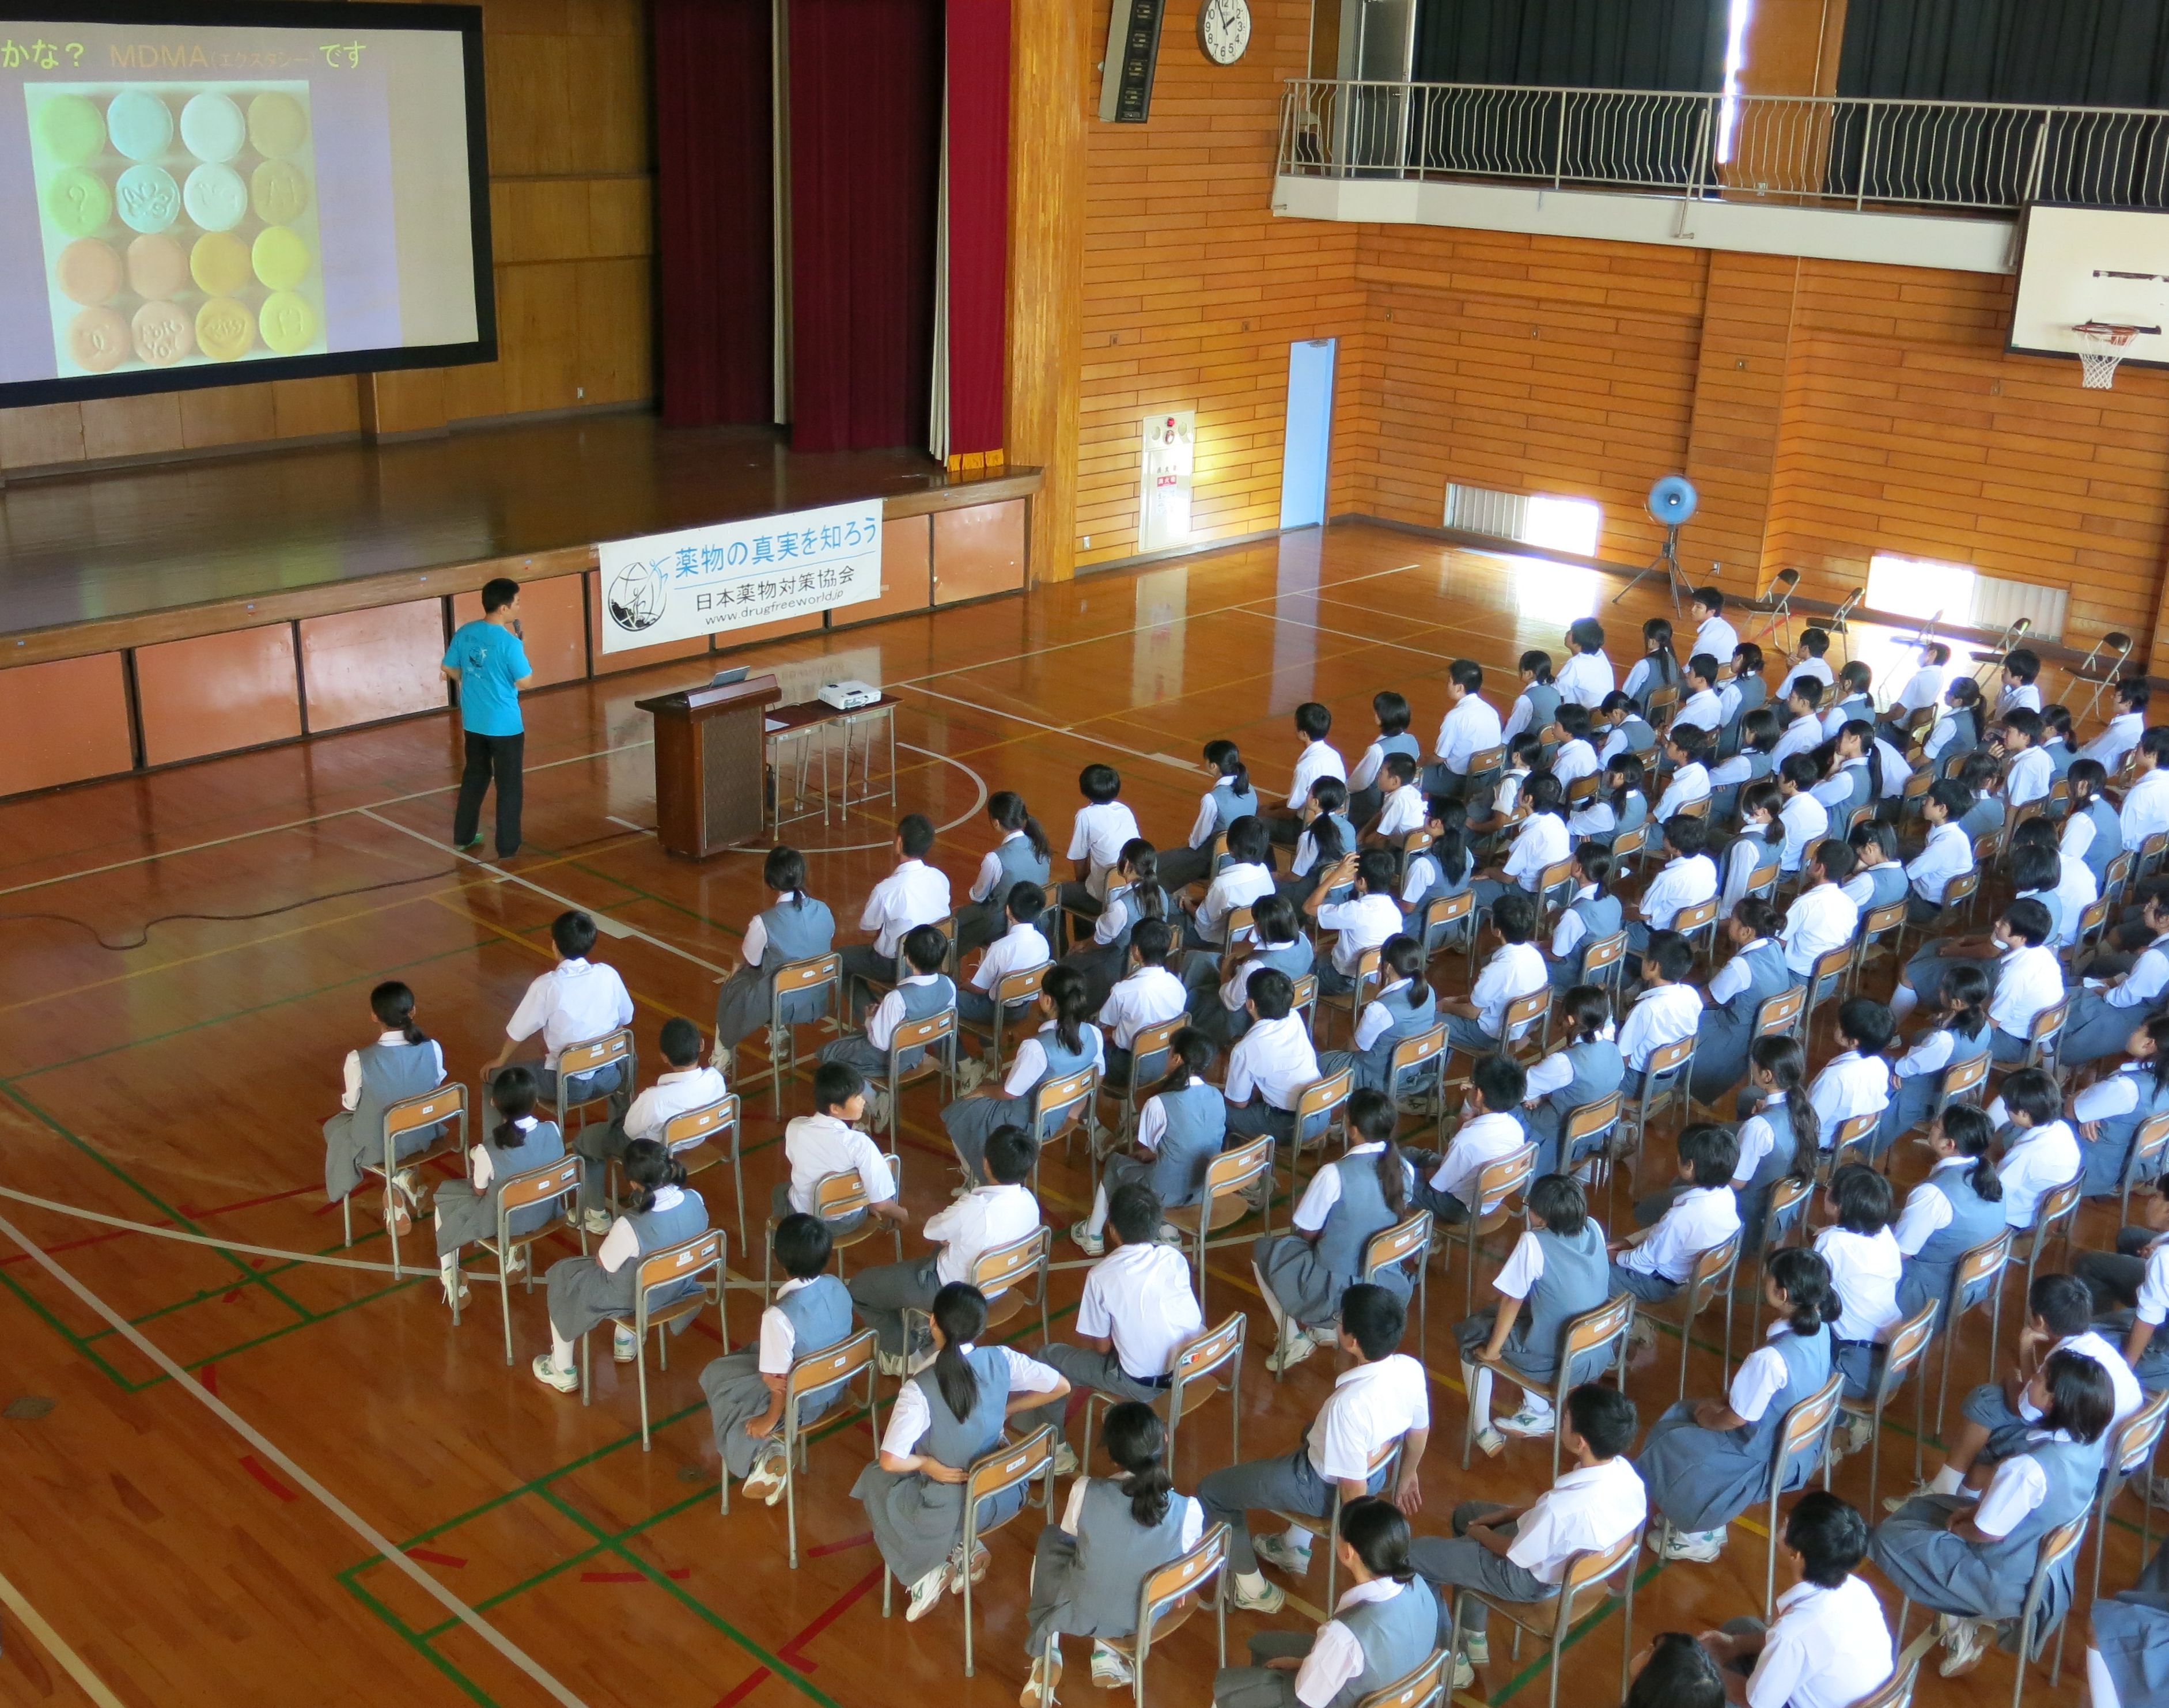 Drug education lecture conducted at Sheishin Daini Junior High School as part of the drug education initiative the Church of Scientology of Tokyo supports.